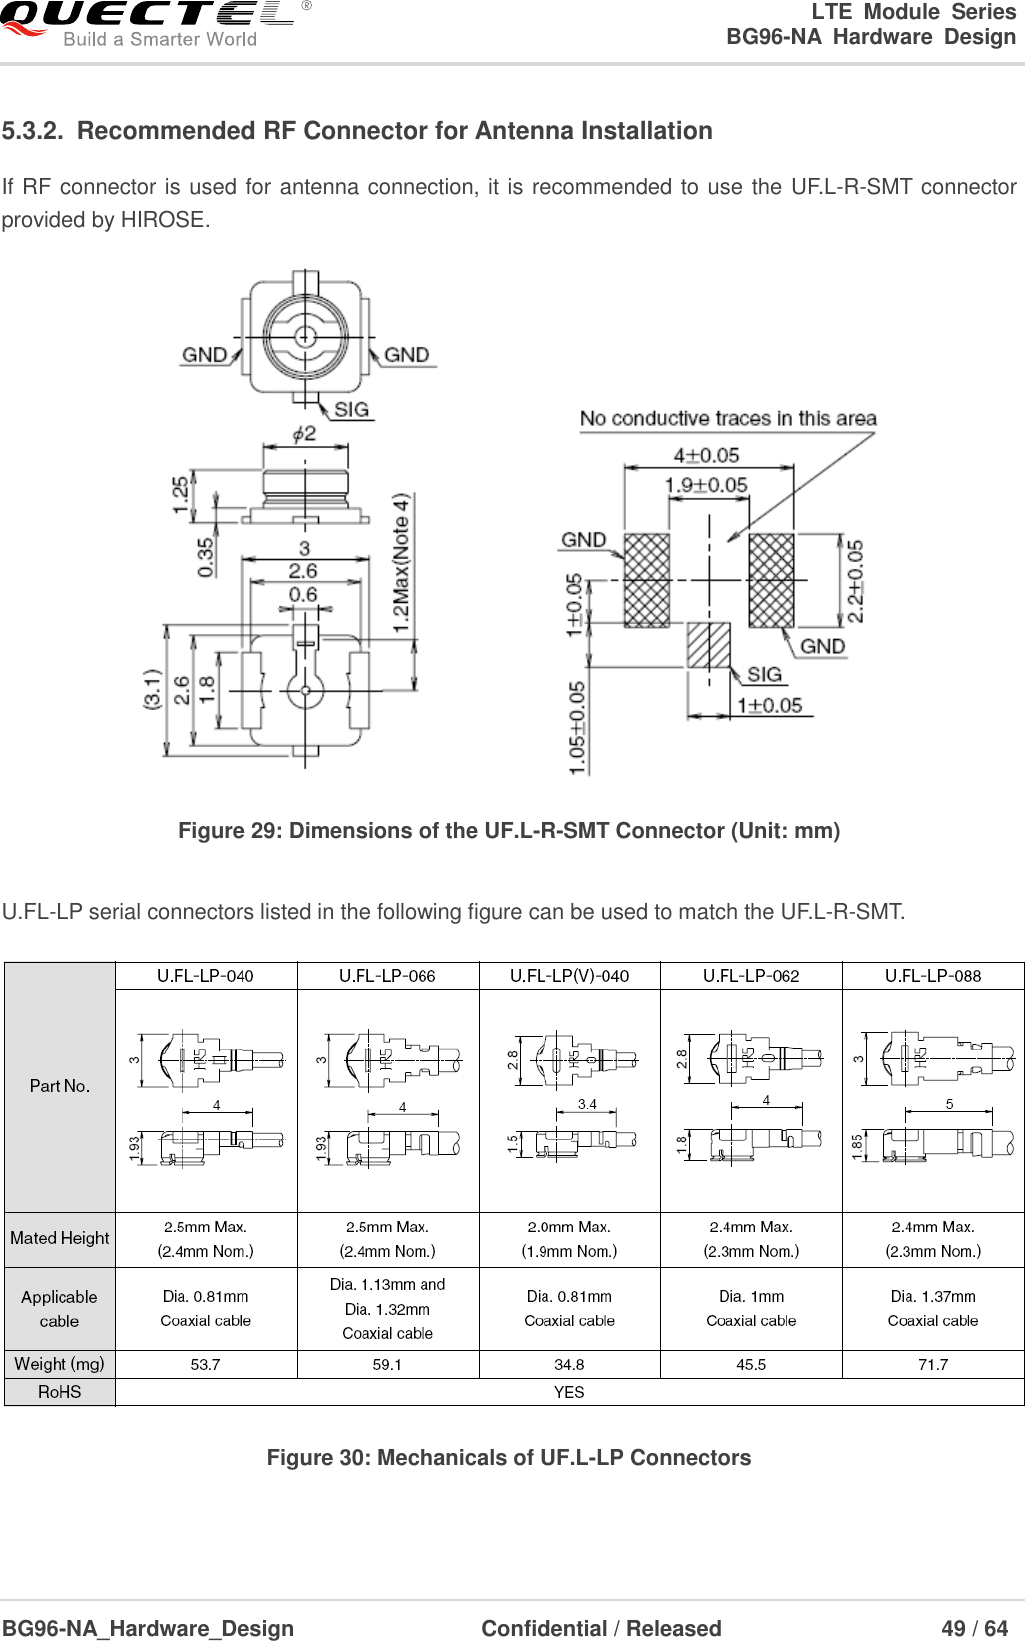 LTE  Module  Series                                                  BG96-NA  Hardware  Design  BG96-NA_Hardware_Design                              Confidential / Released                                  49 / 64    5.3.2.  Recommended RF Connector for Antenna Installation If RF connector is used for antenna connection, it is recommended to use the UF.L-R-SMT connector provided by HIROSE.    Figure 29: Dimensions of the UF.L-R-SMT Connector (Unit: mm)  U.FL-LP serial connectors listed in the following figure can be used to match the UF.L-R-SMT.  Figure 30: Mechanicals of UF.L-LP Connectors   